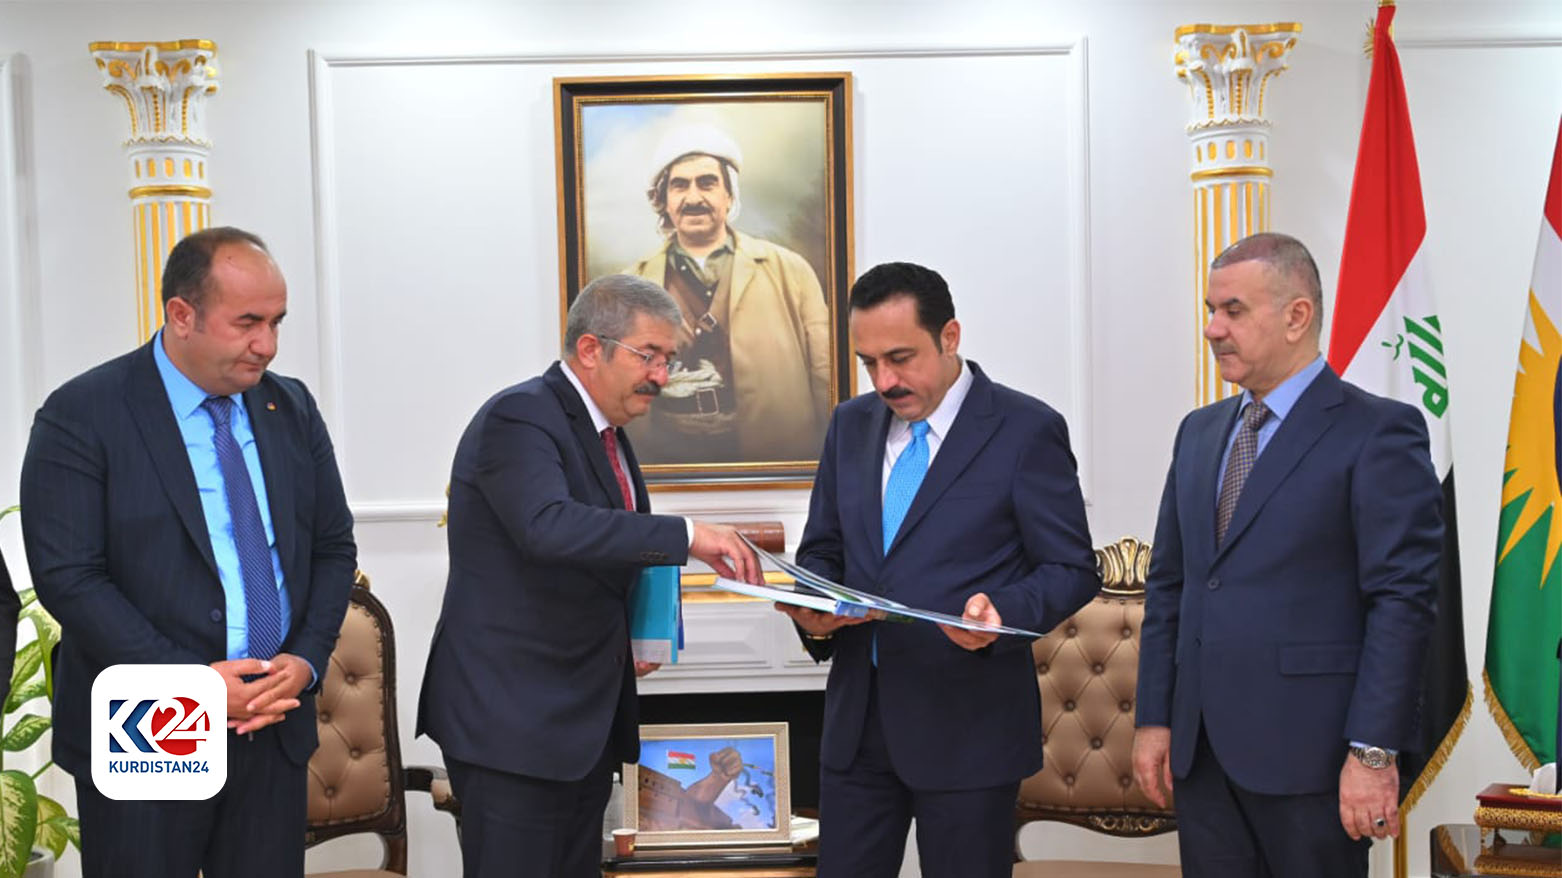 Erbil Governor Omed Khoshnaw meets with Turkish delegation to strengthen economic ties